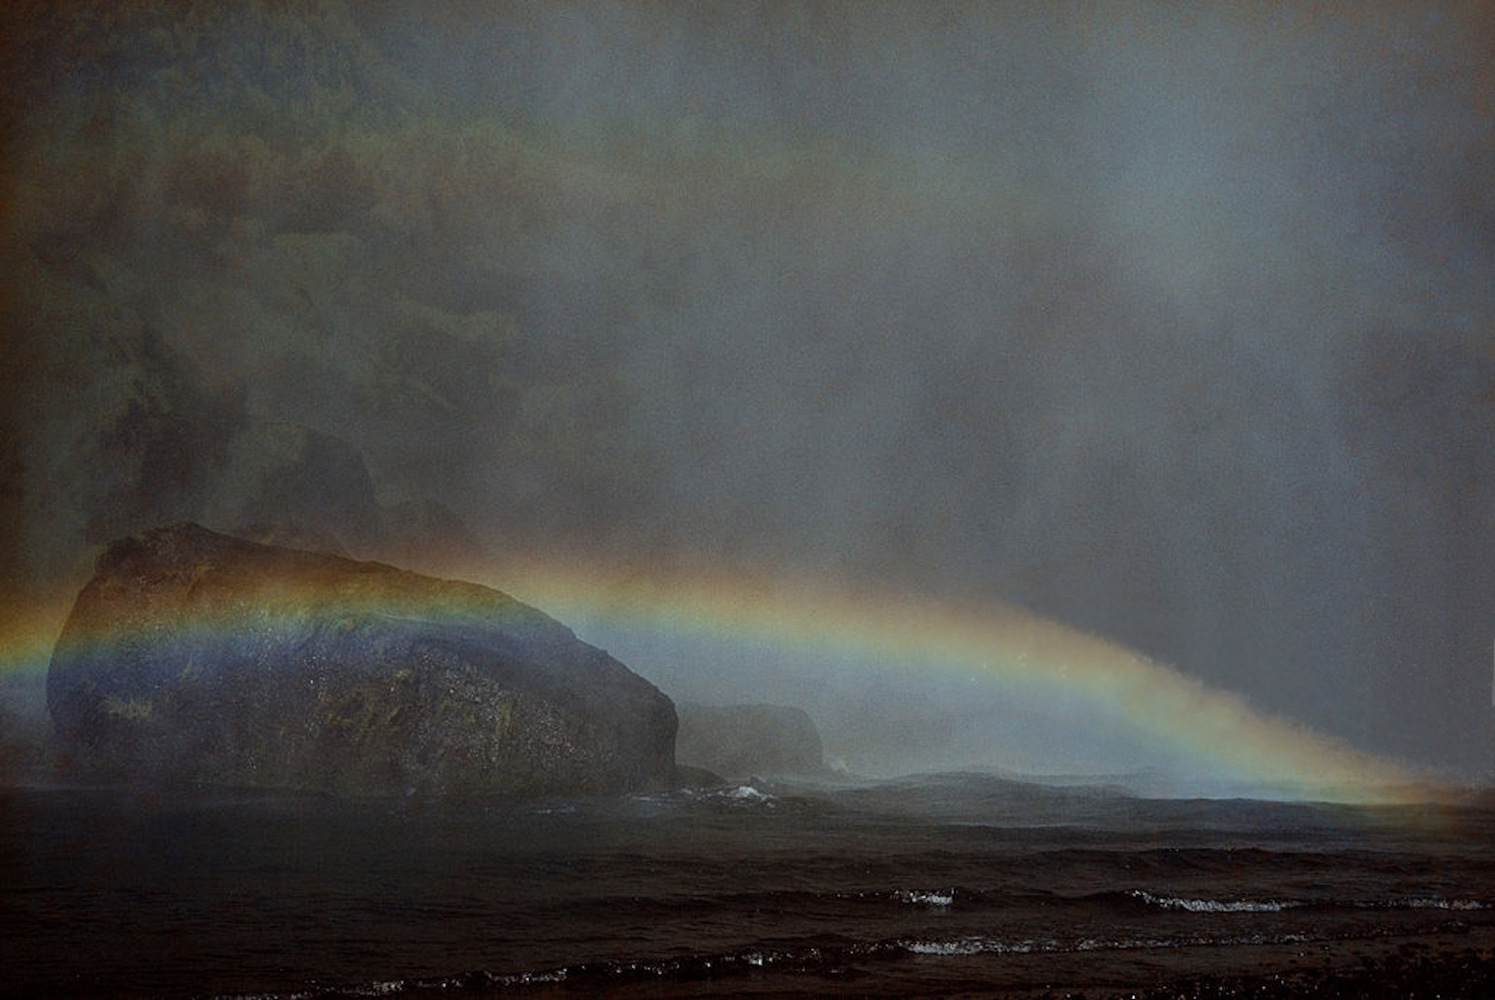 A double rainbow over the sea in Iceland, 1975